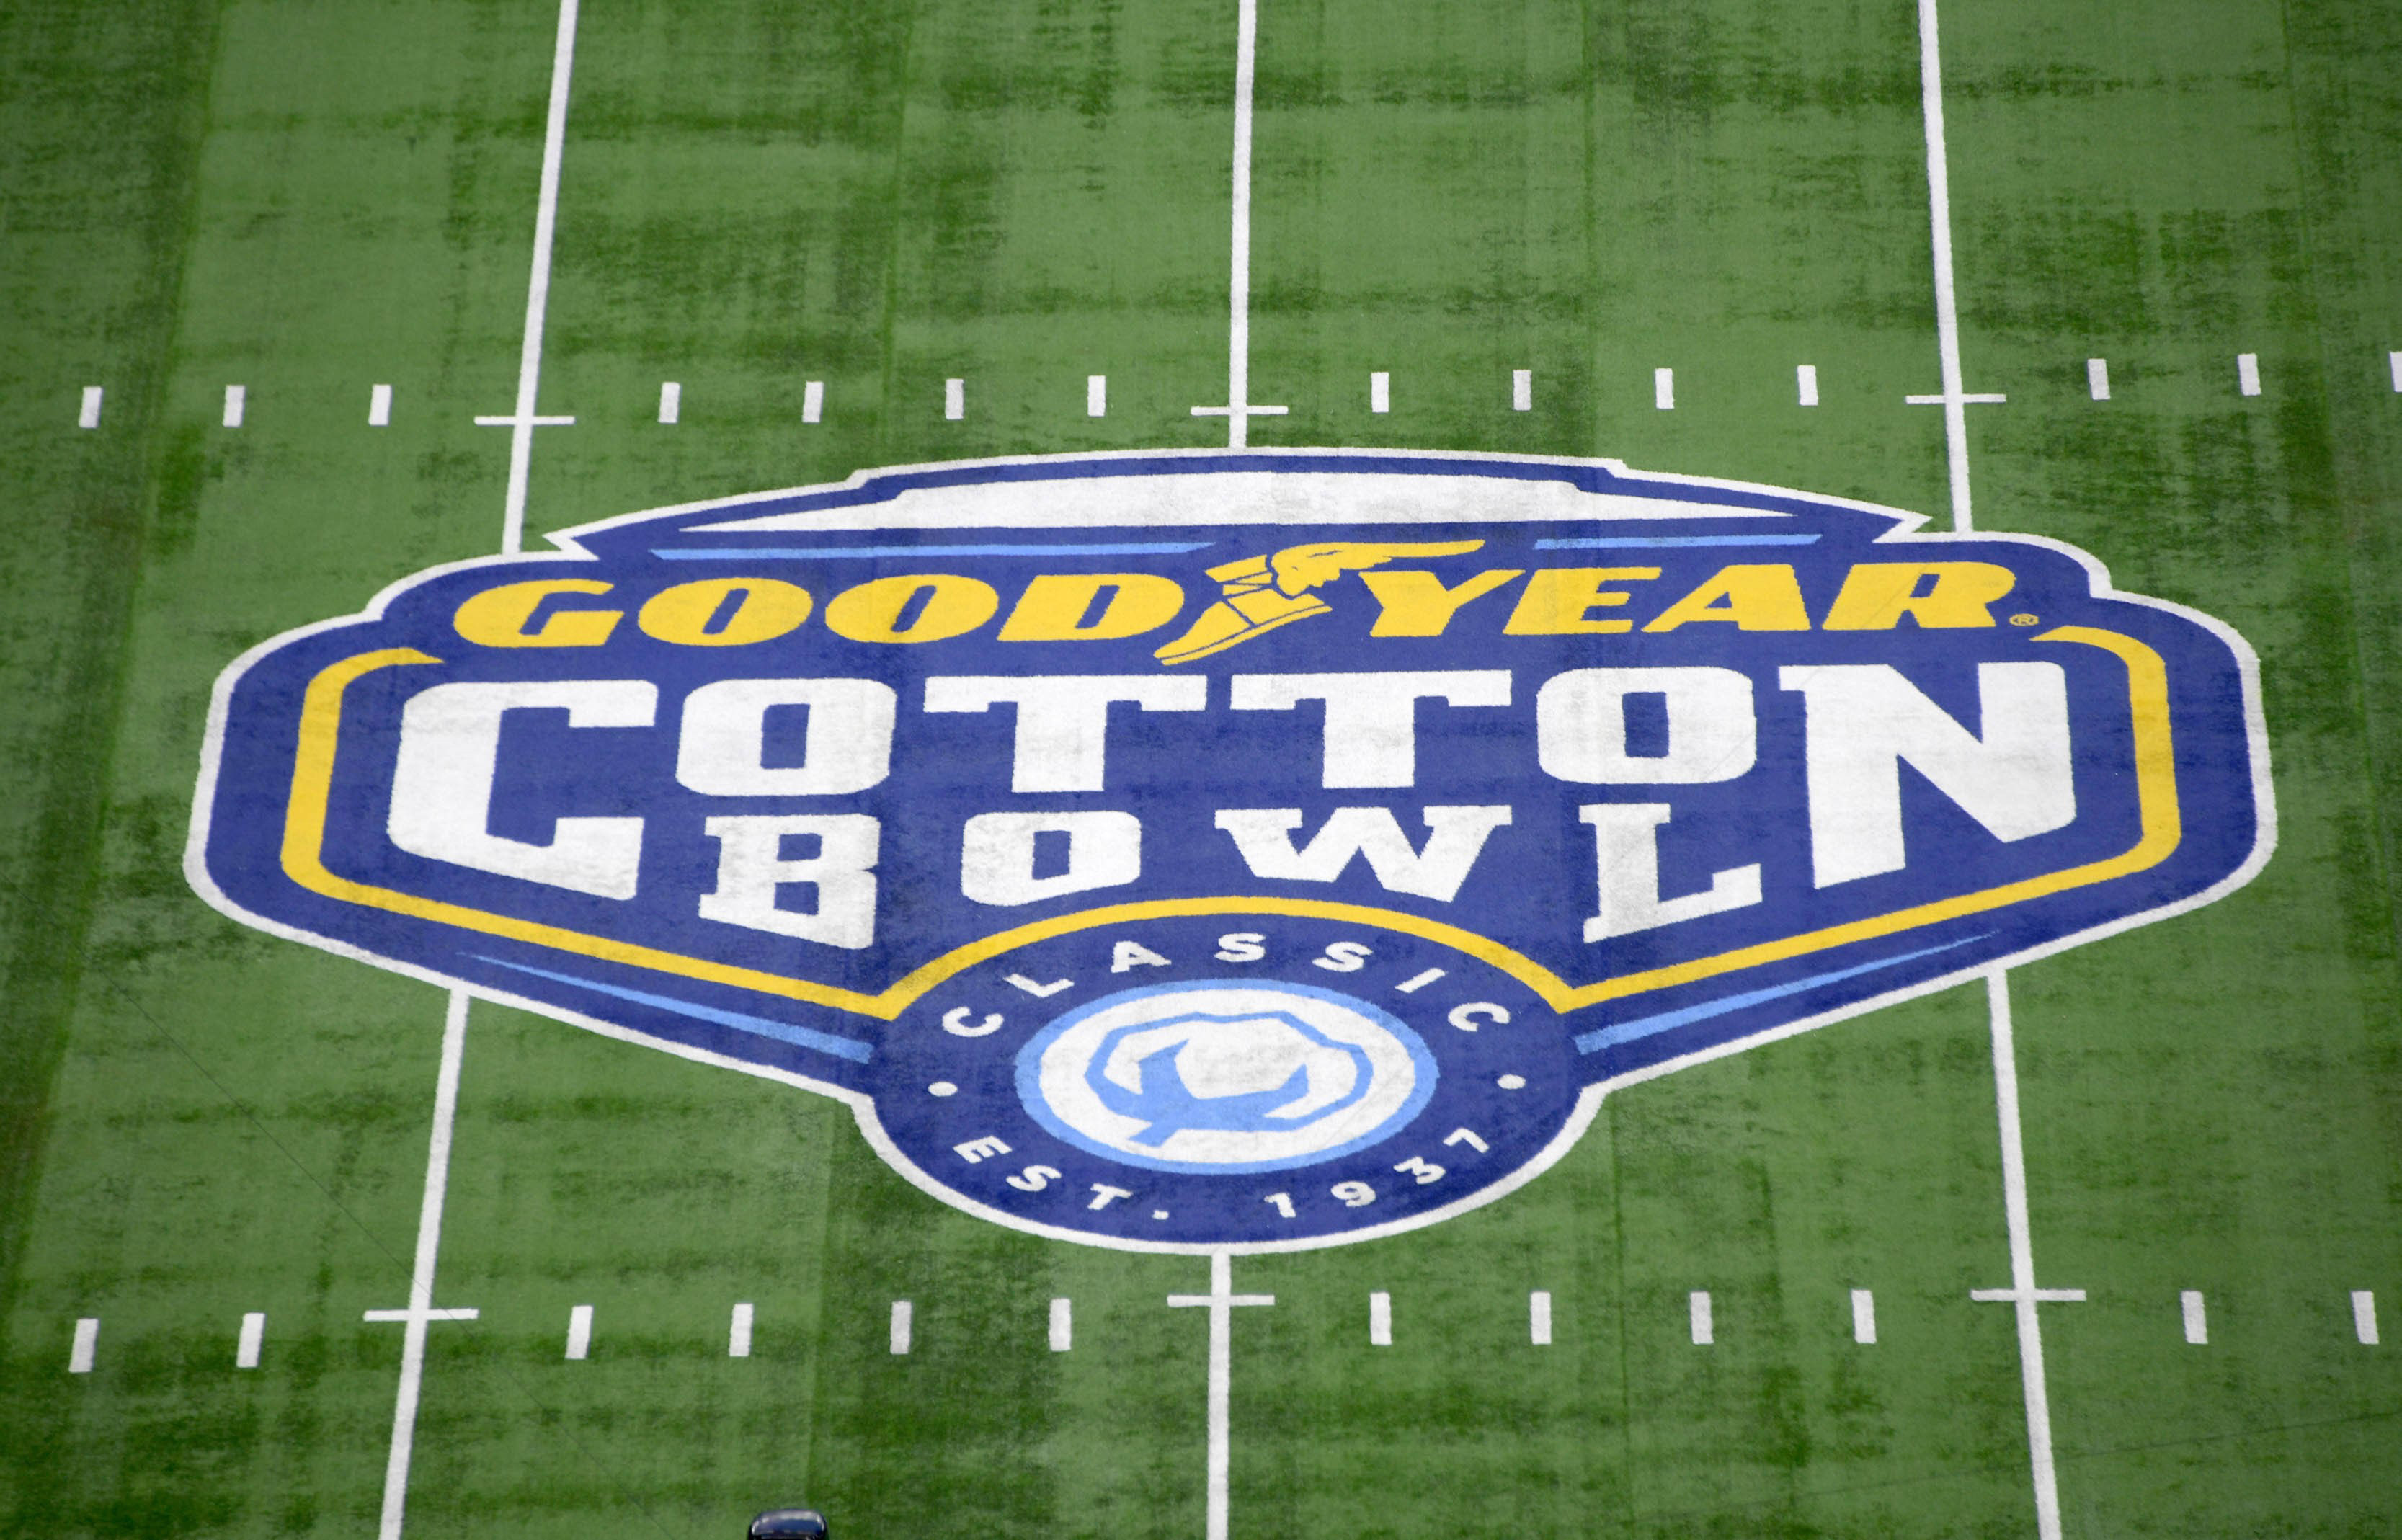 Current ticket prices for Ohio State vs. Missouri in the Cotton Bowl